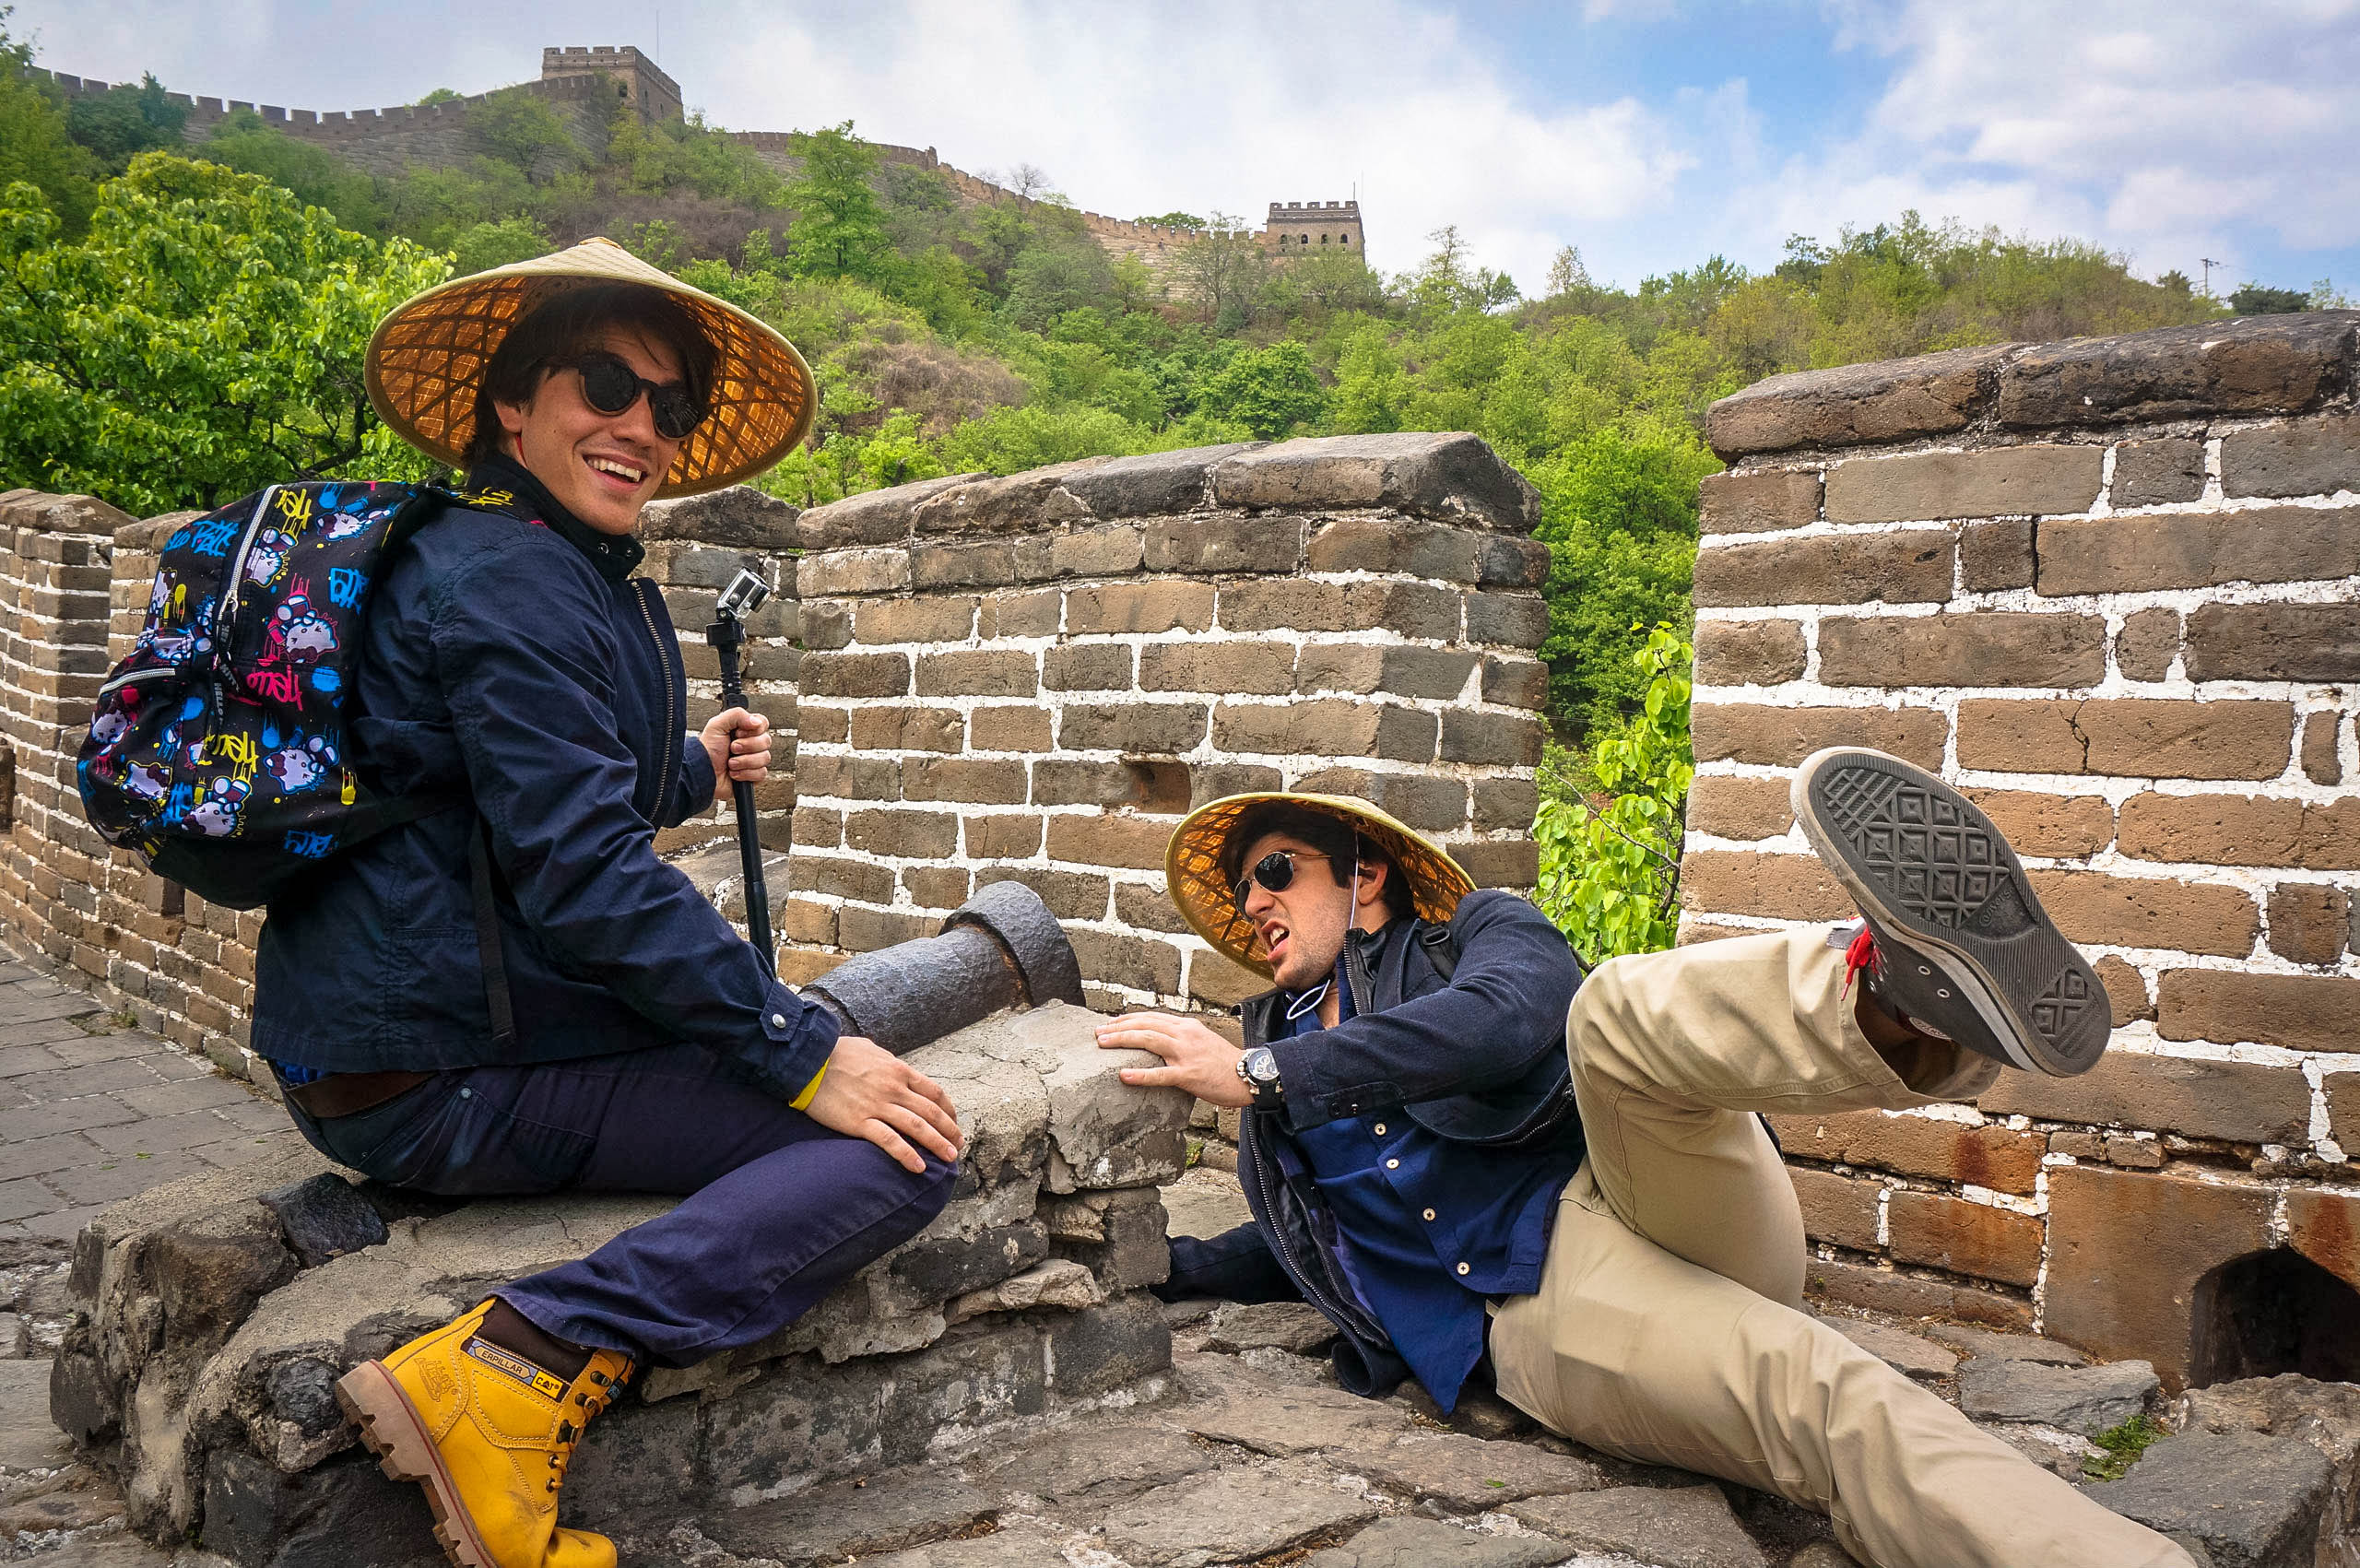 Goofing Around on the Great Wall